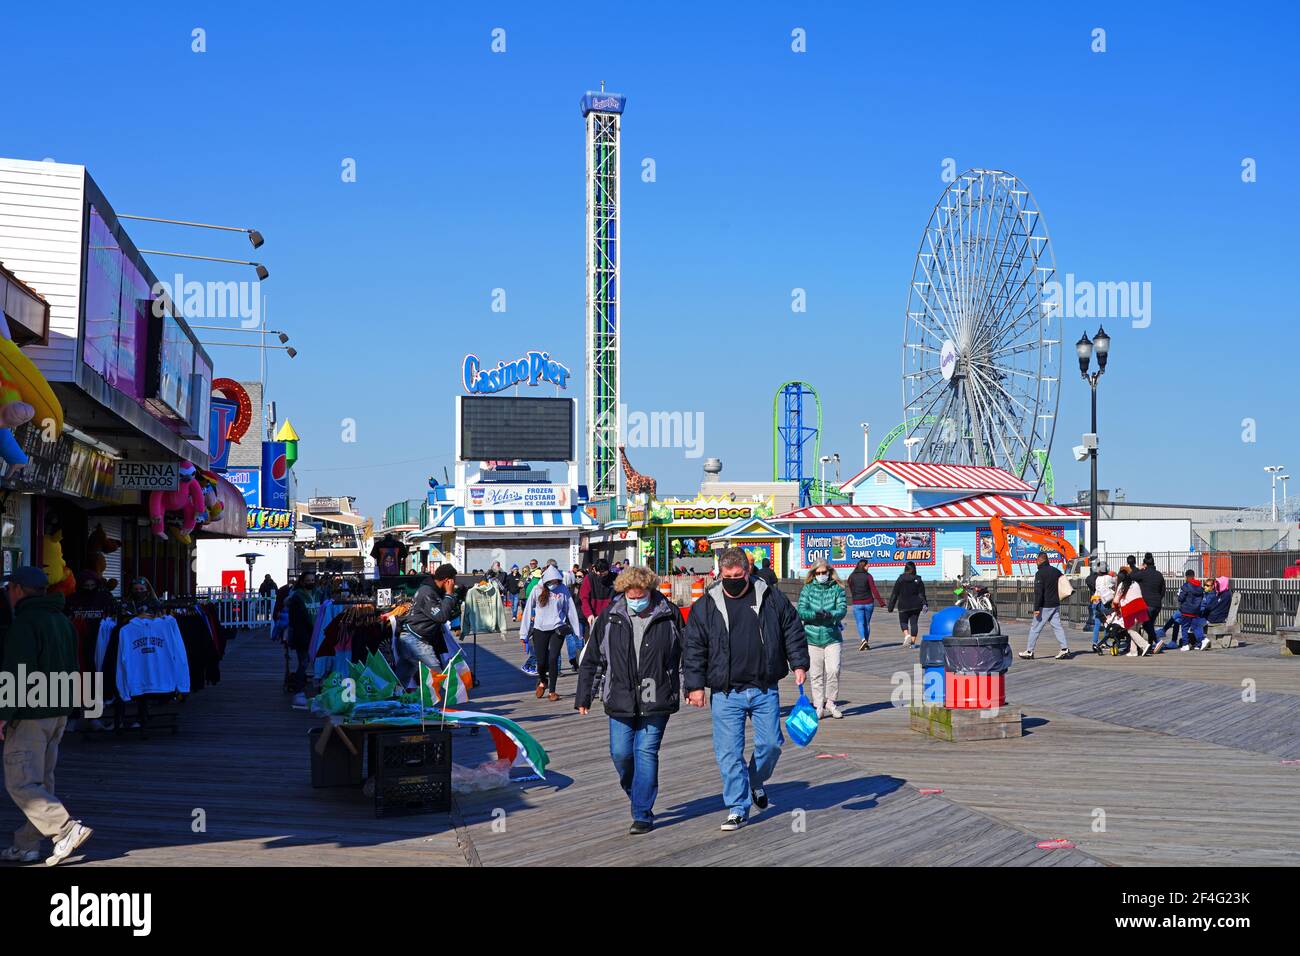 SEASIDE HEIGHTS, NJ -13 MAR 2021- Day view of the landmark beach boardwalk by Casino Pier on the New Jersey Shore, Ocean County, United States. Stock Photo